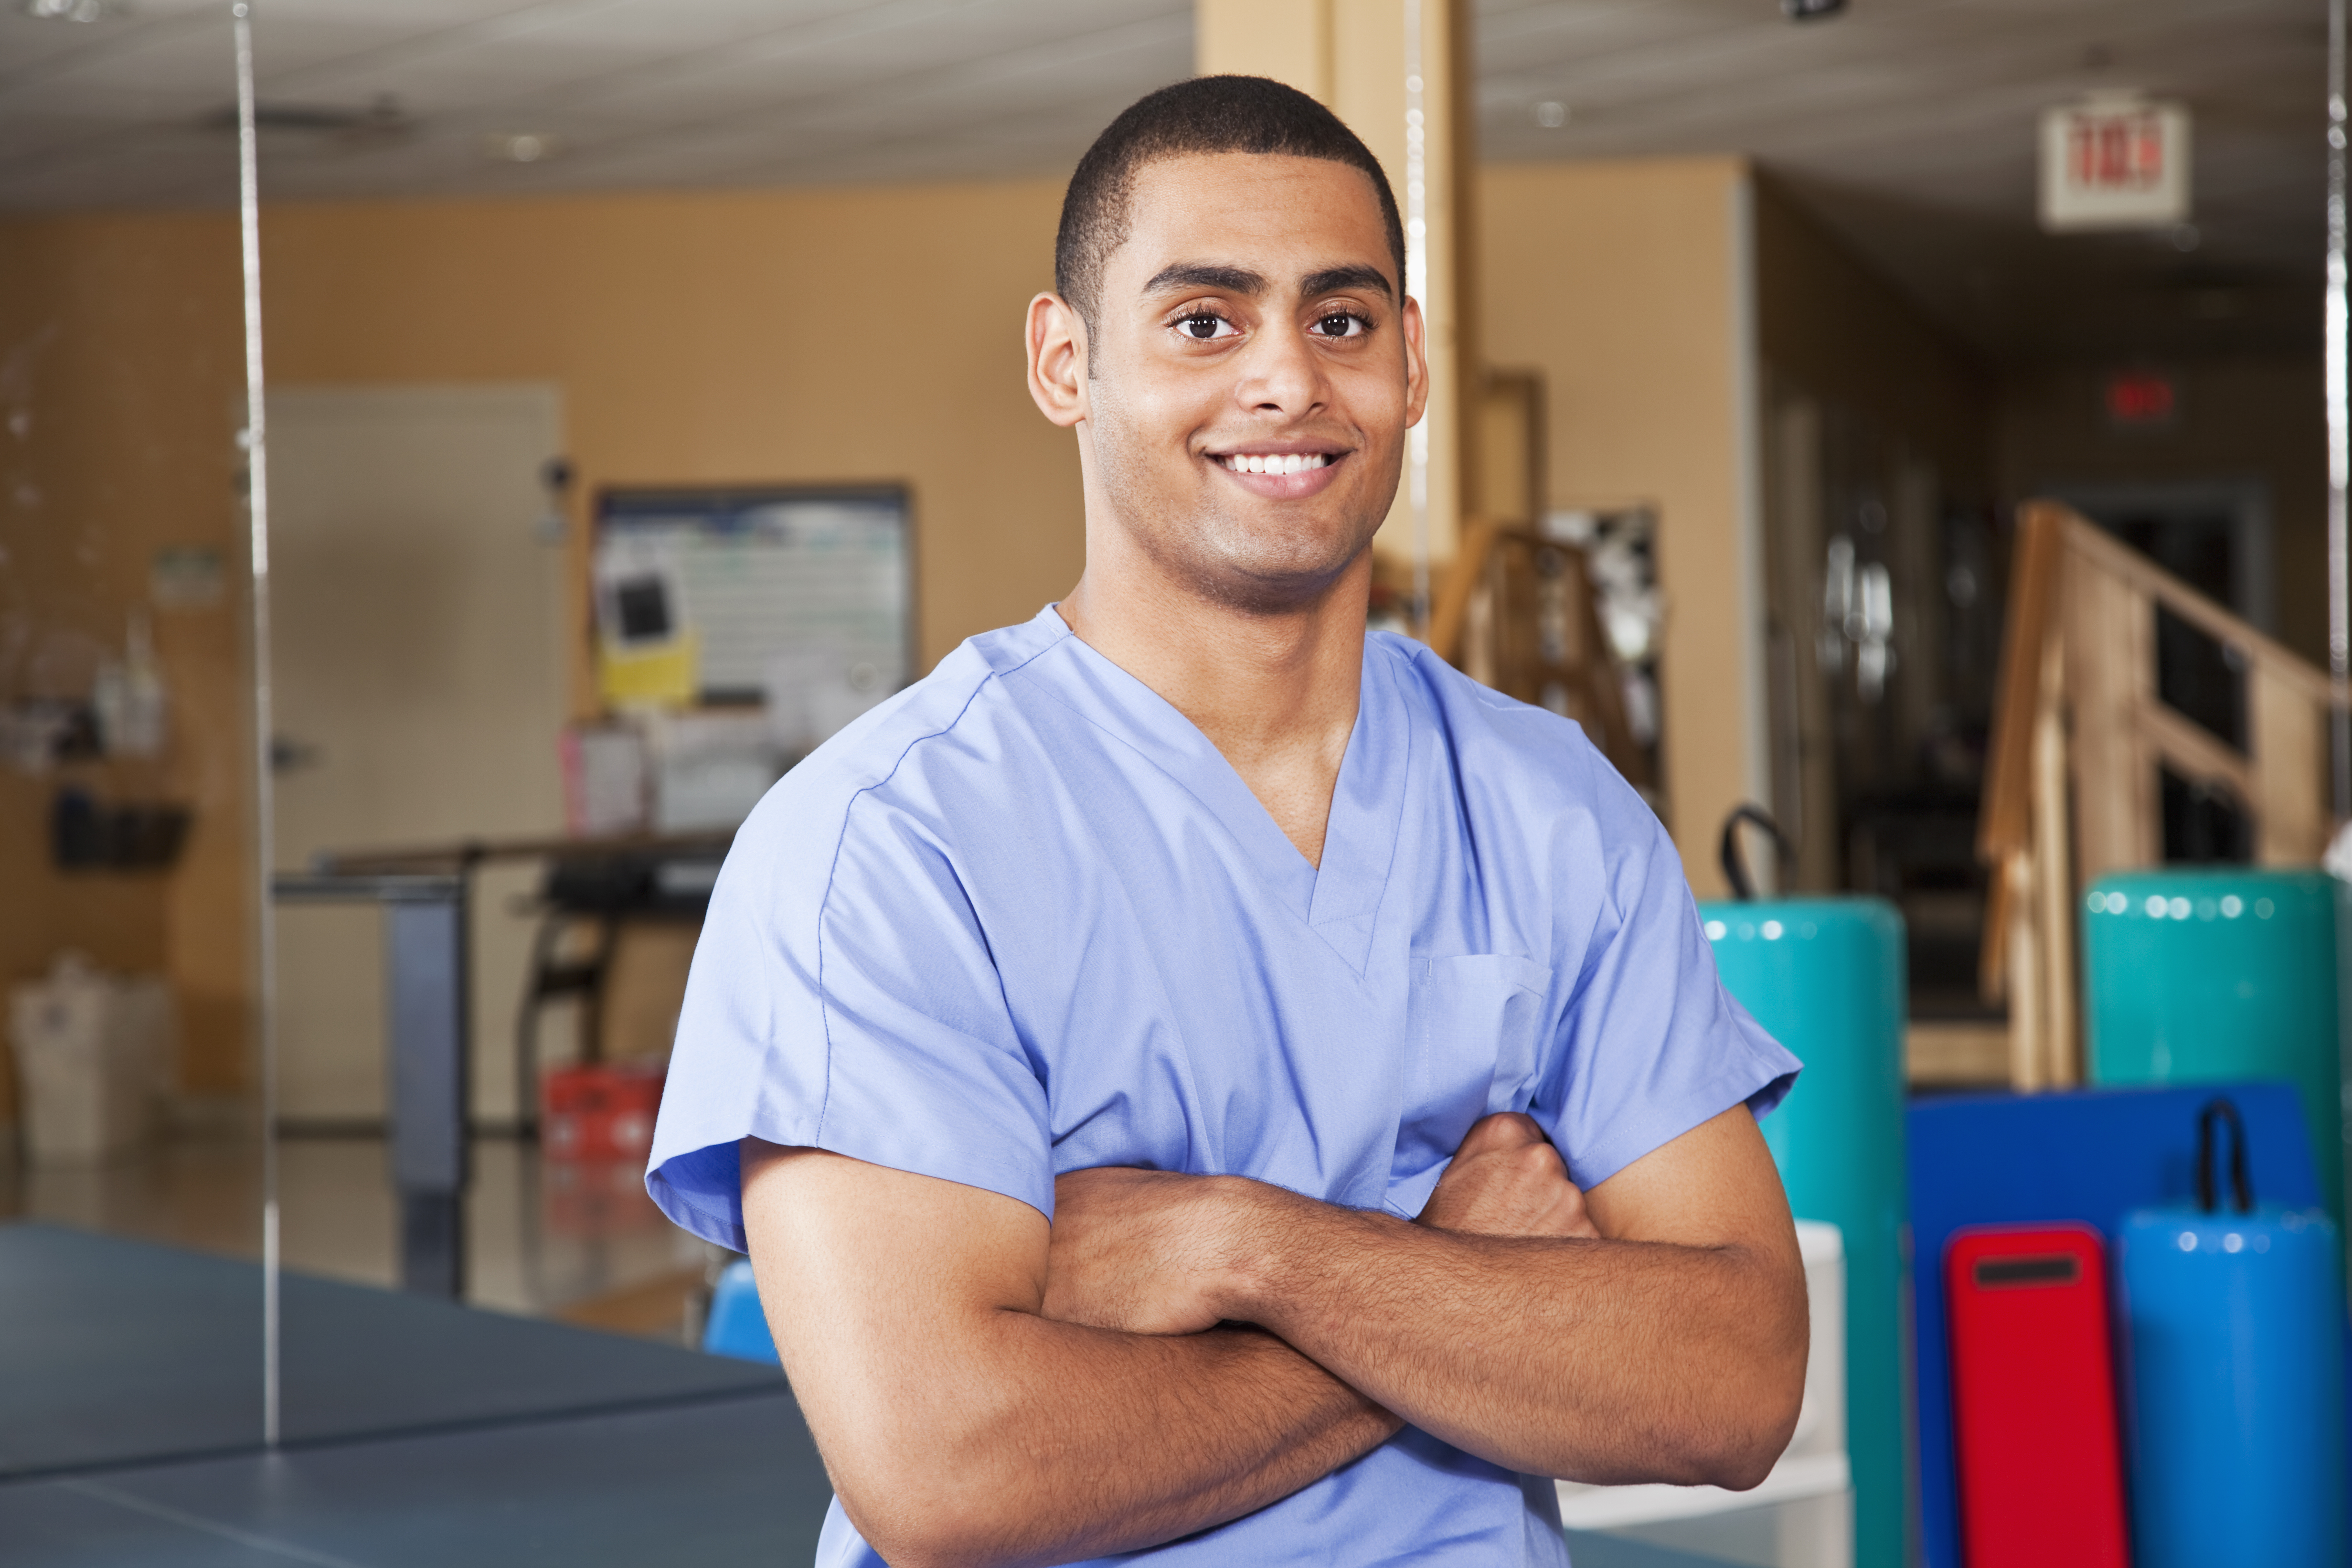 Interested in working in healthcare? An apprenticeship could be for you